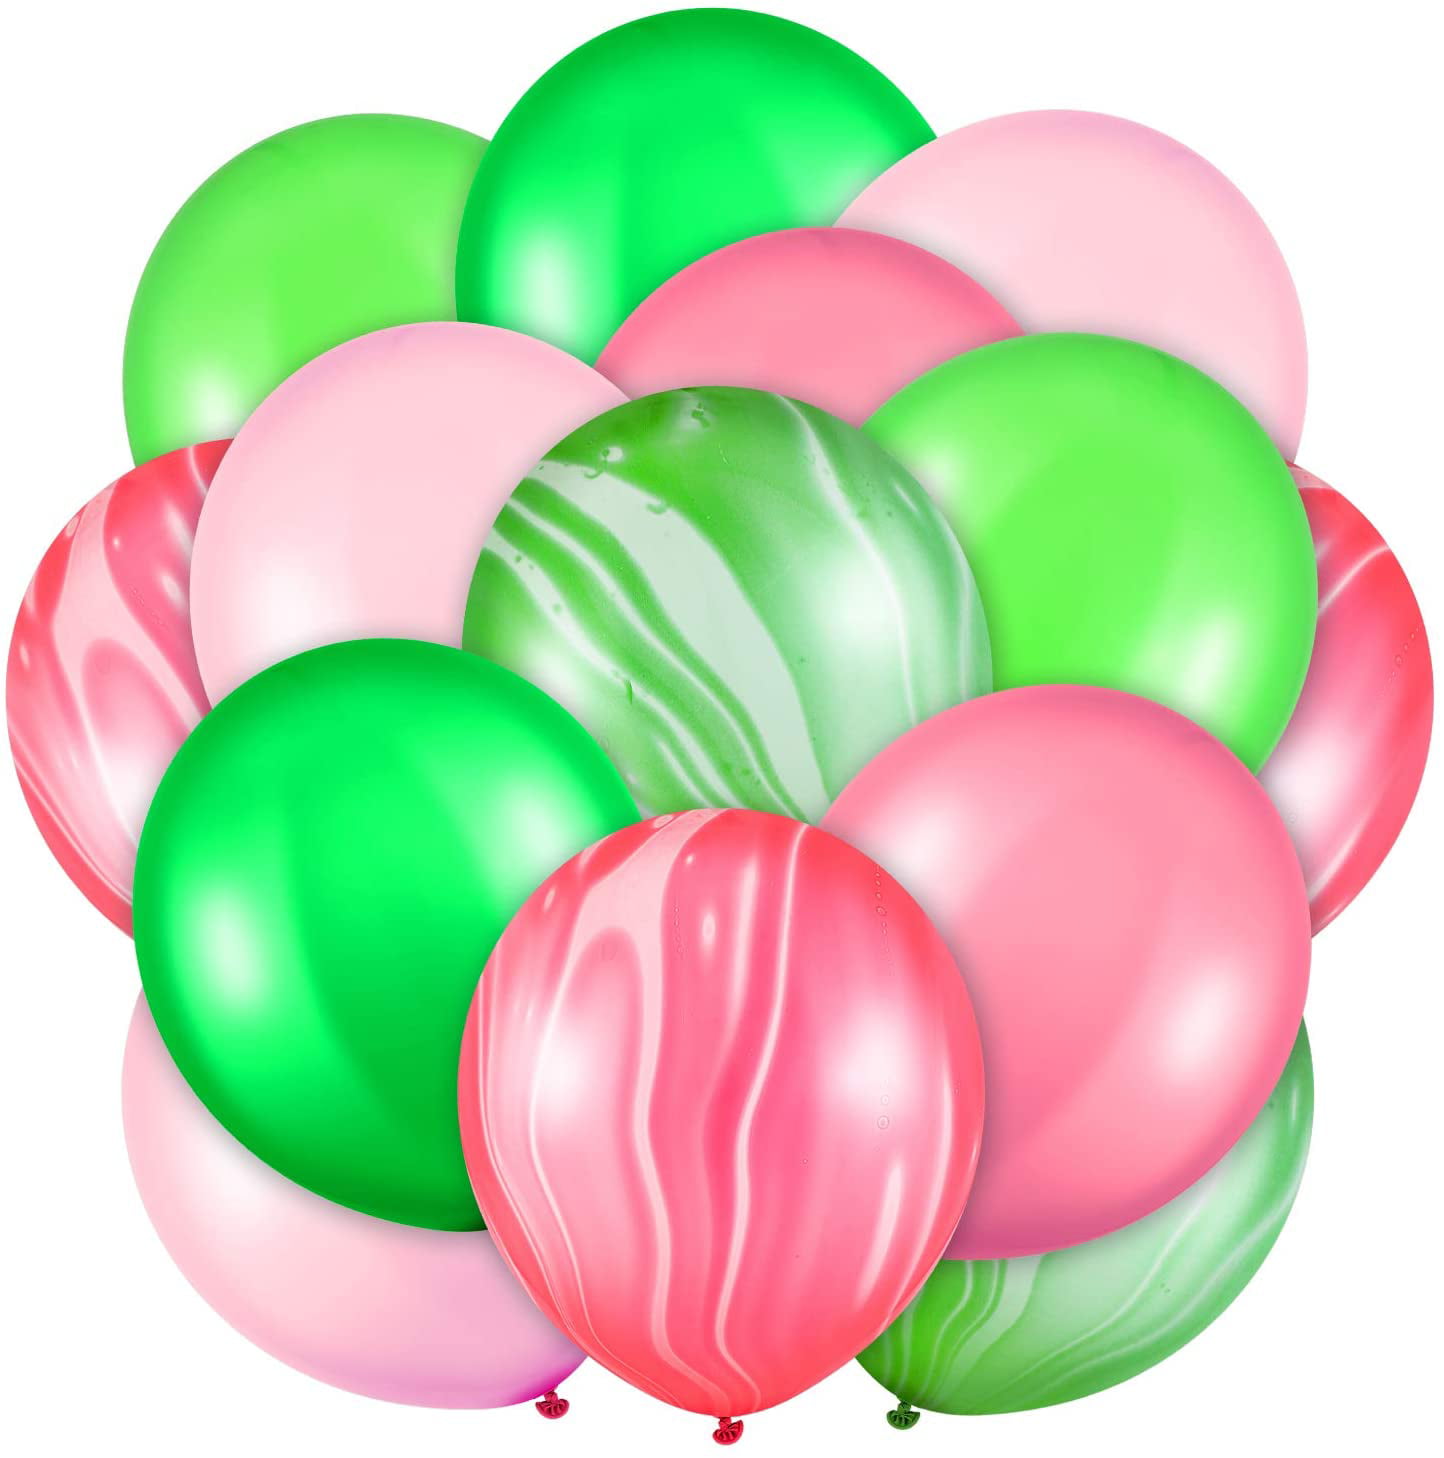 GREEN  FOIL  WEDDING BIRTHDAY PARTY EVENT 12 X UNIQUE HELIUM BALLOON WEIGHTS 